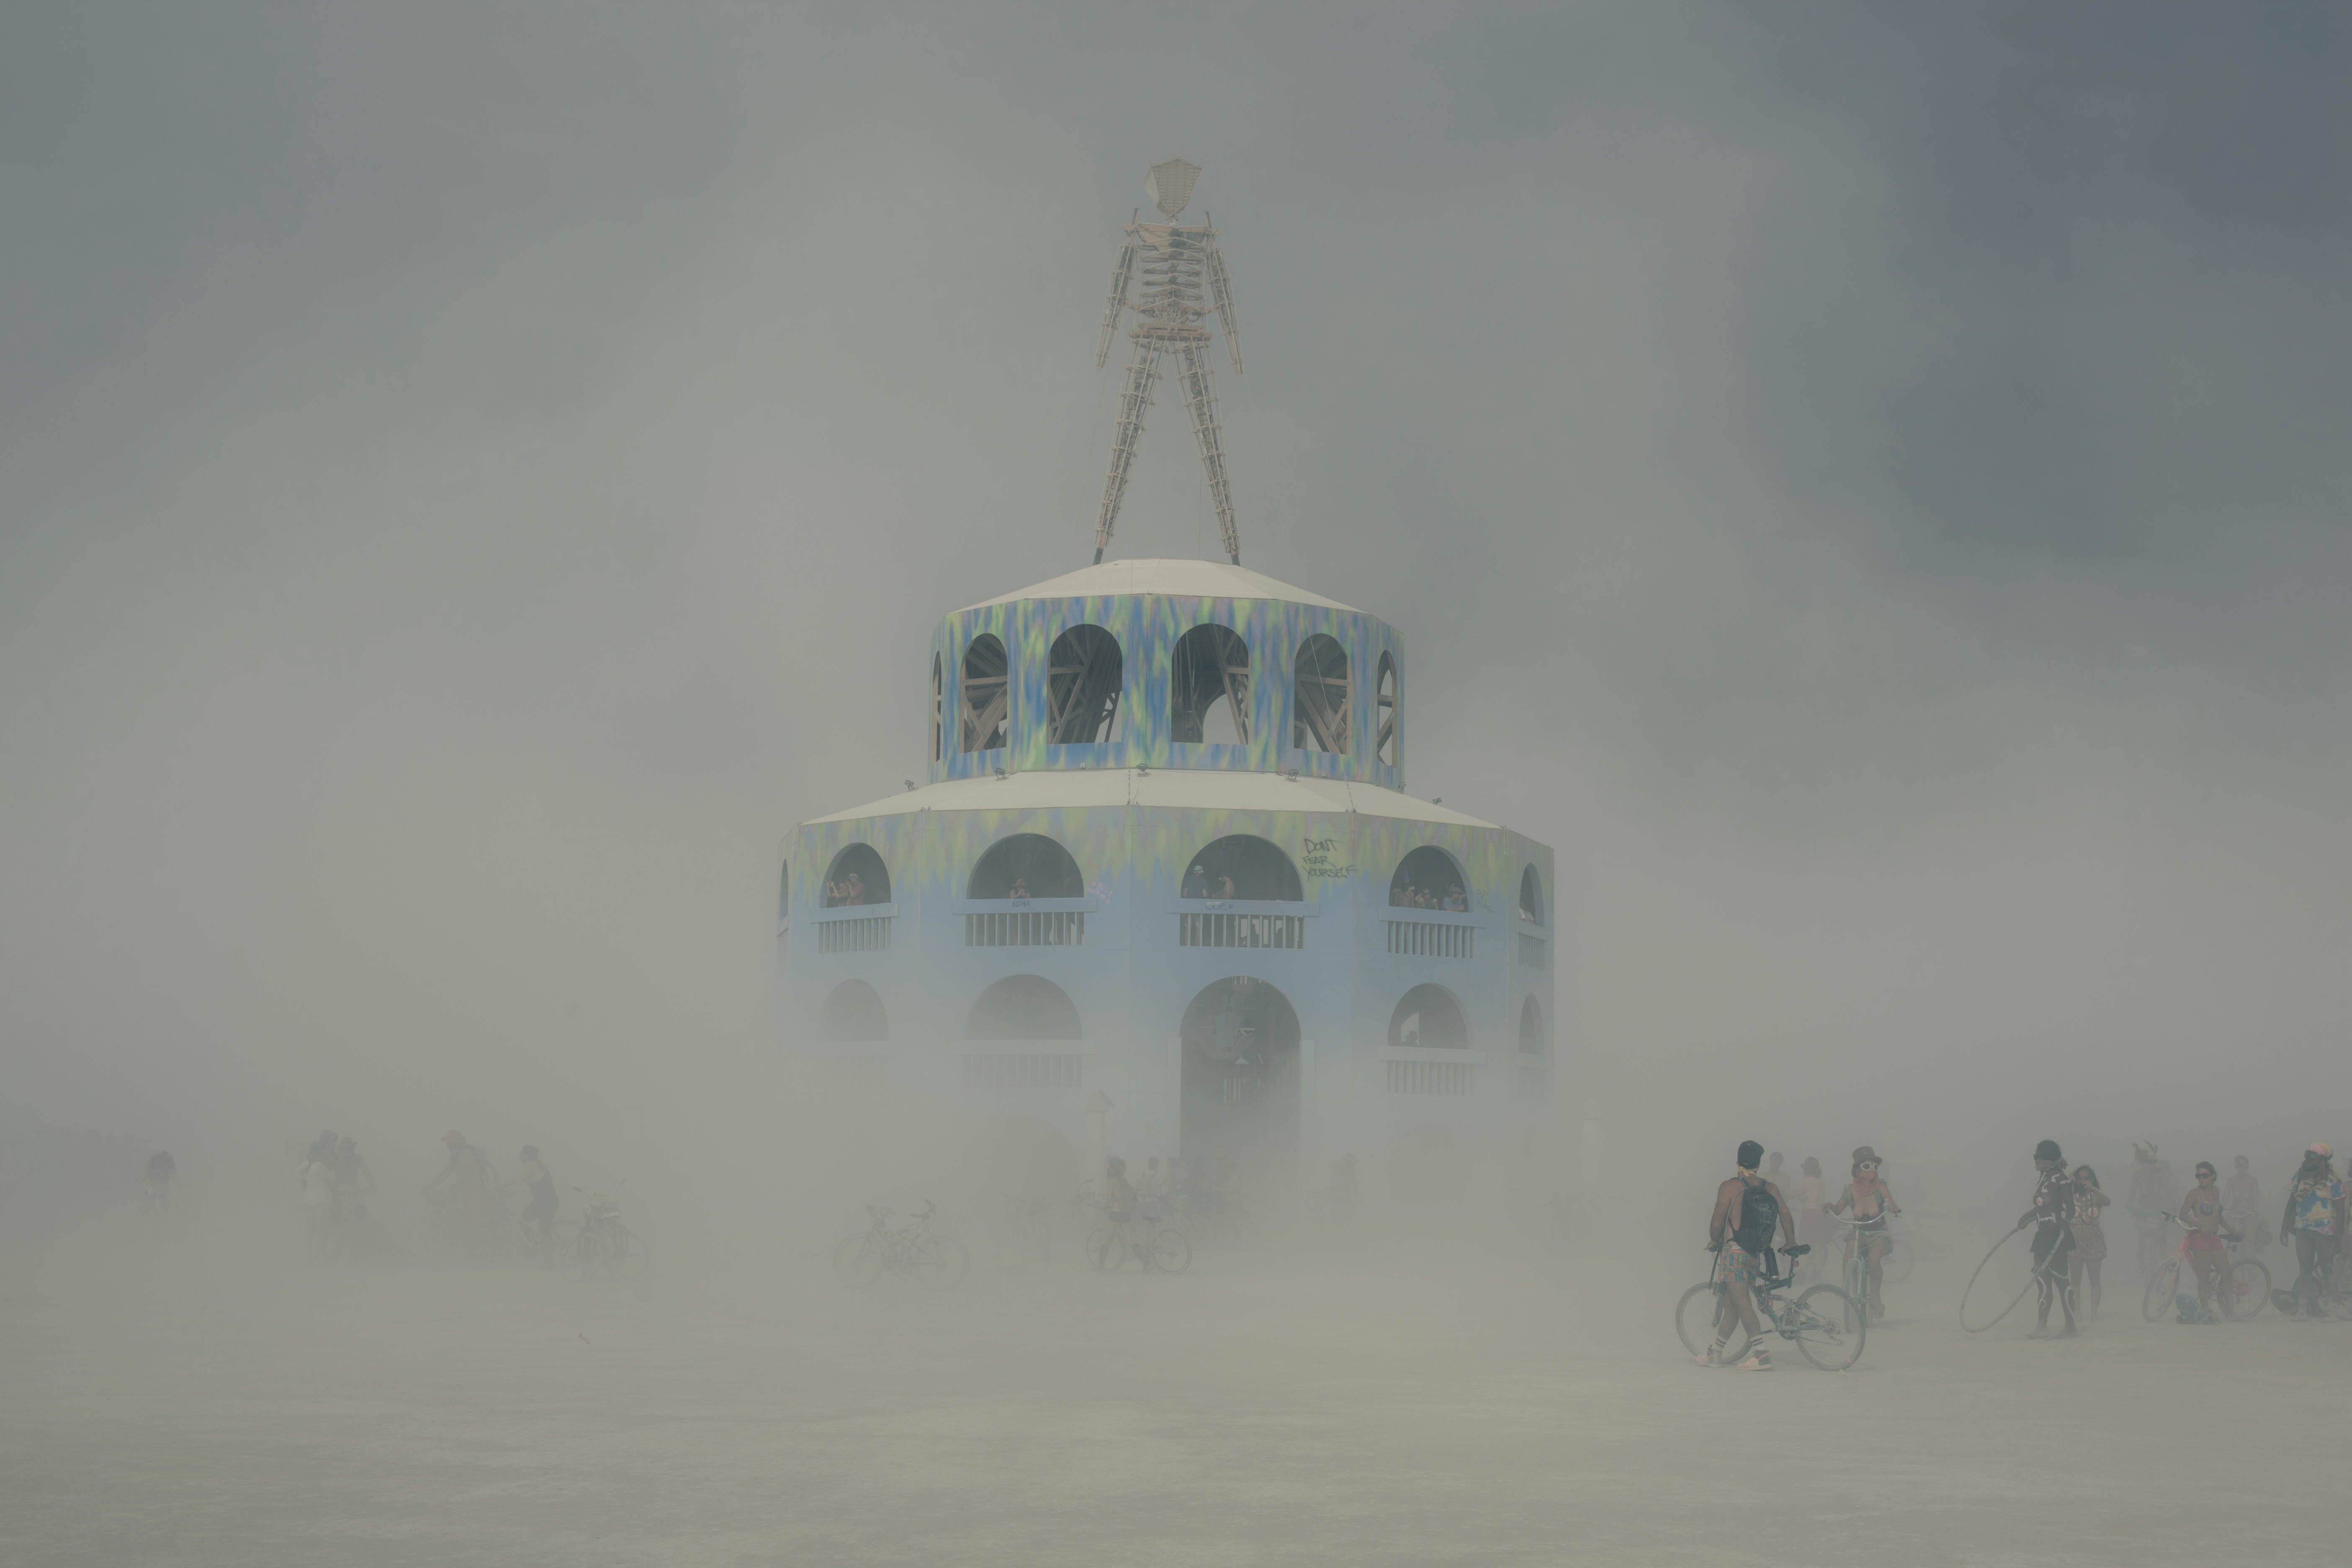 IGNITE: A Burning Man Experience